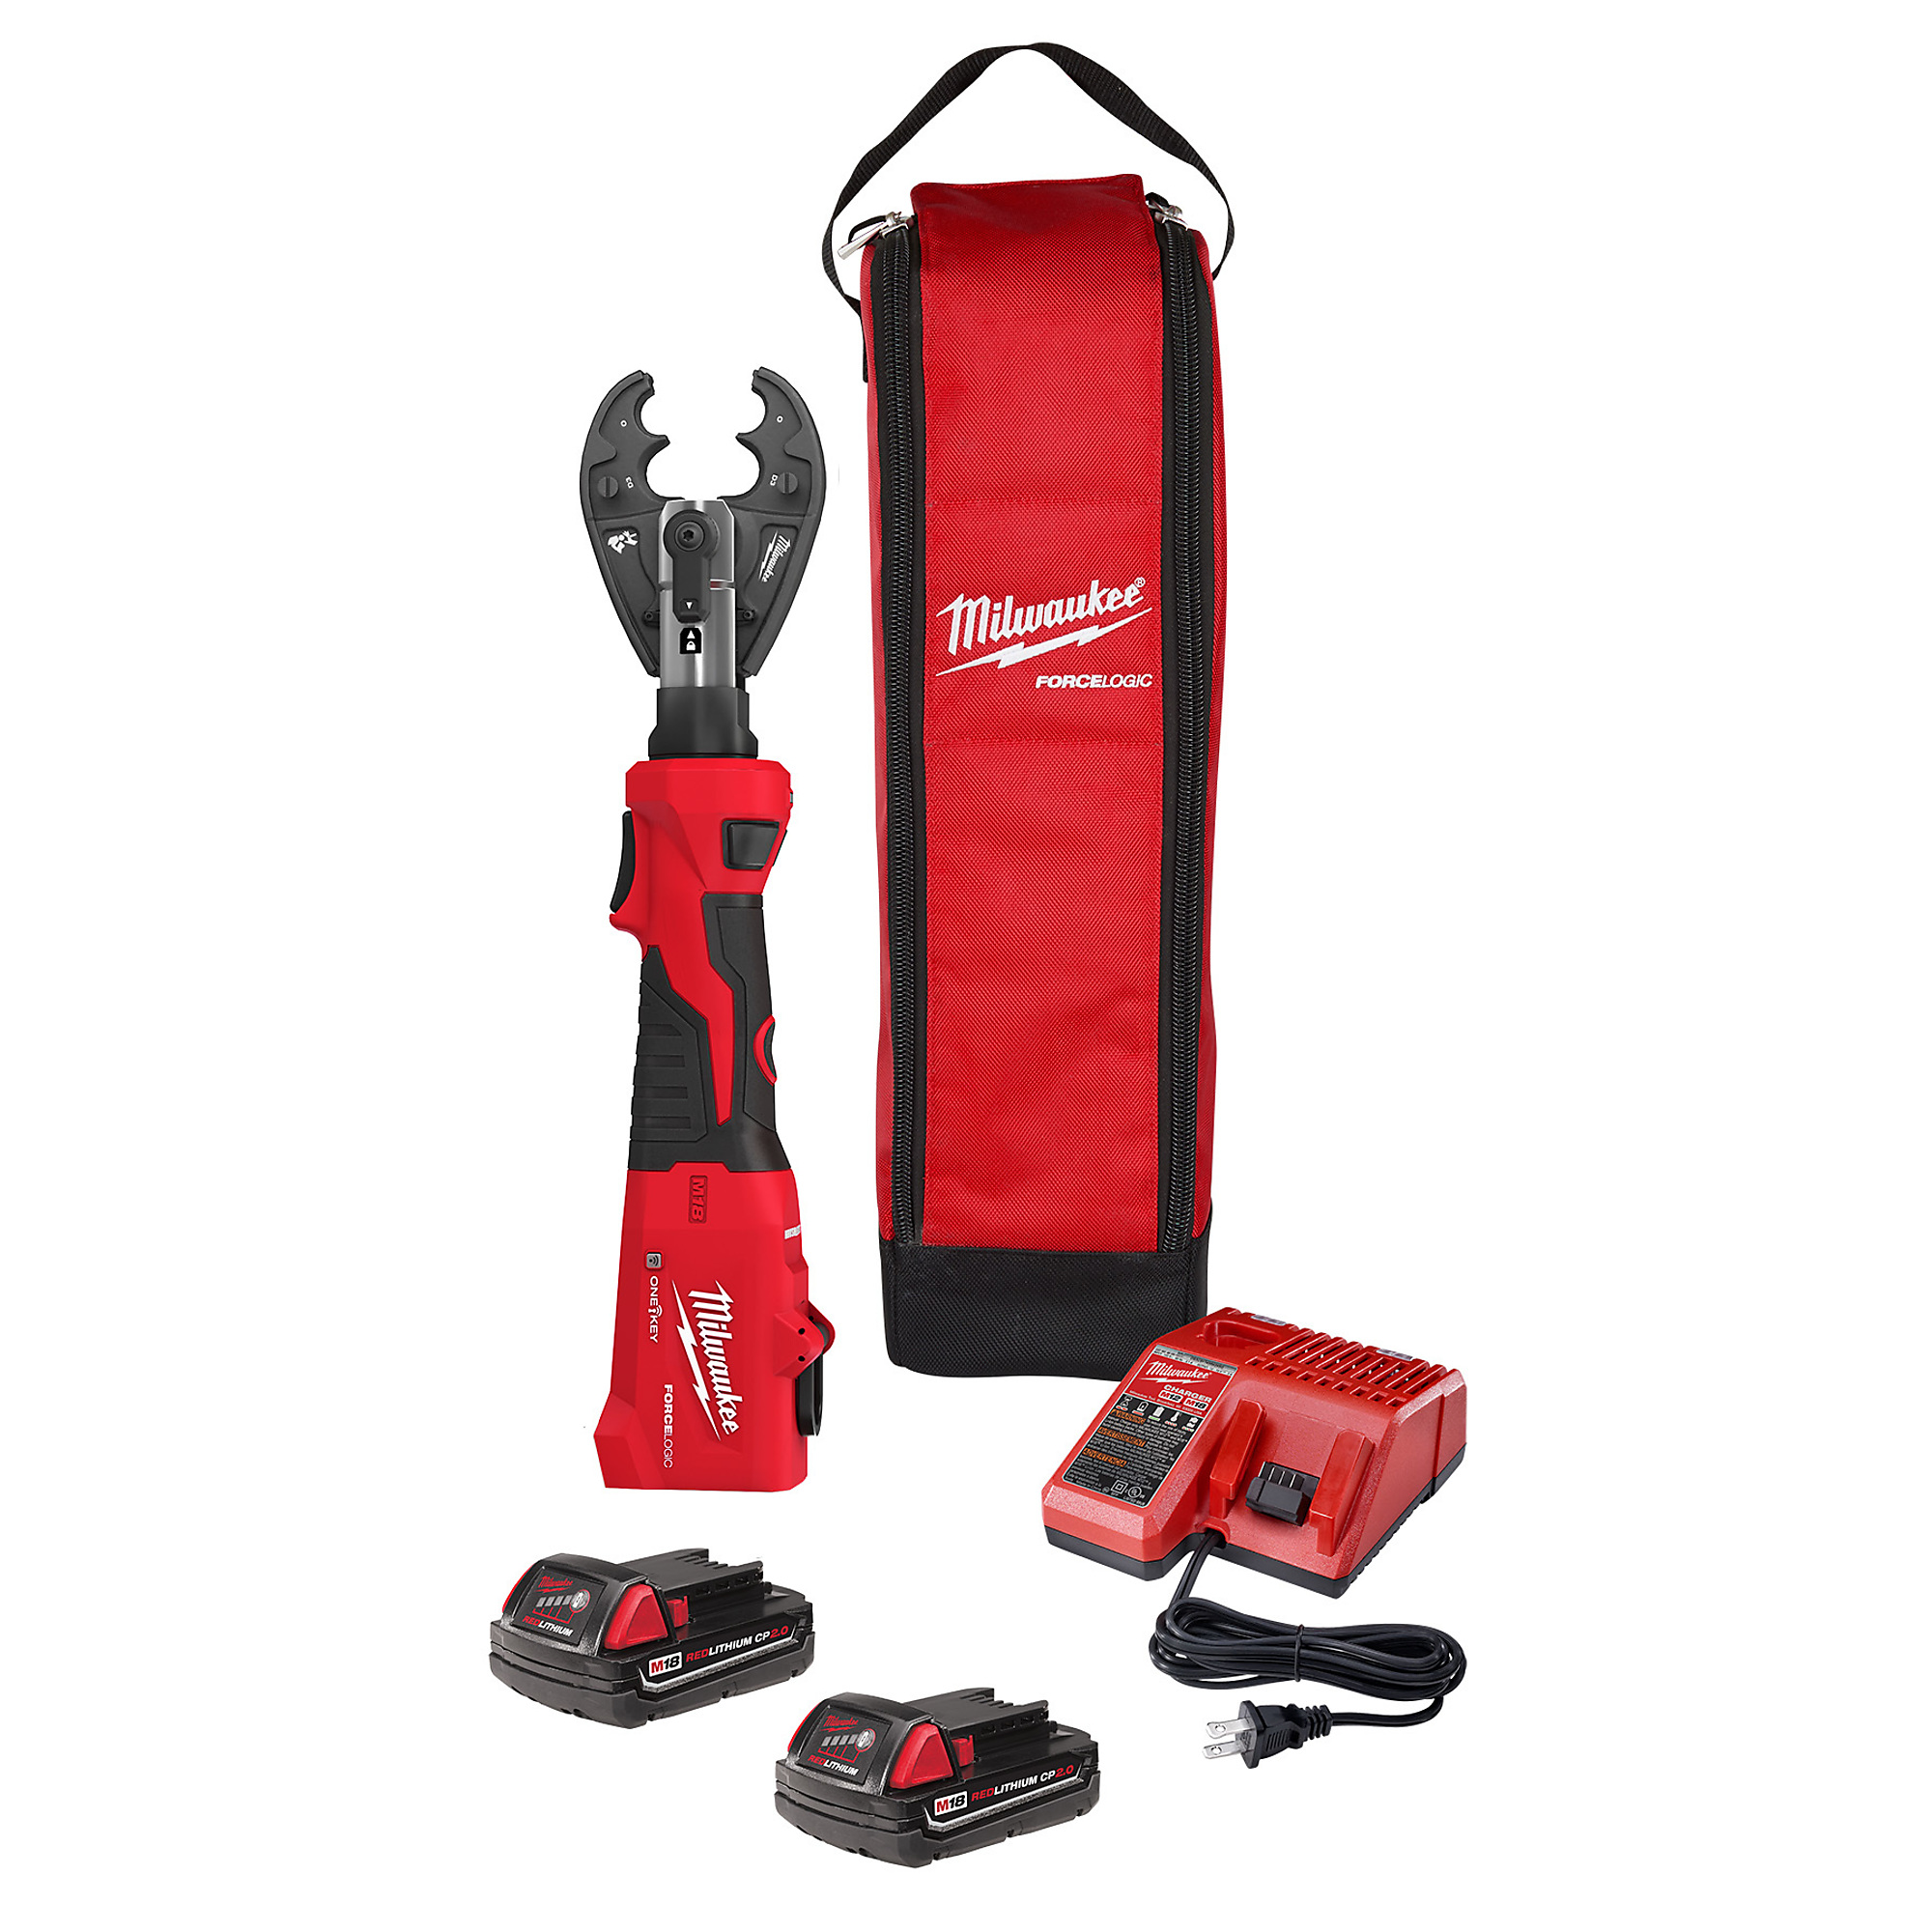 Milwaukee M18 FORCE LOGIC , M18 FORCE LOGIC 6T Linear Utility Crimper Kit w/ O-D3 Jaw, Chuck Size Multiple in, Tools Included (qty.) 1 Model 2978-22O